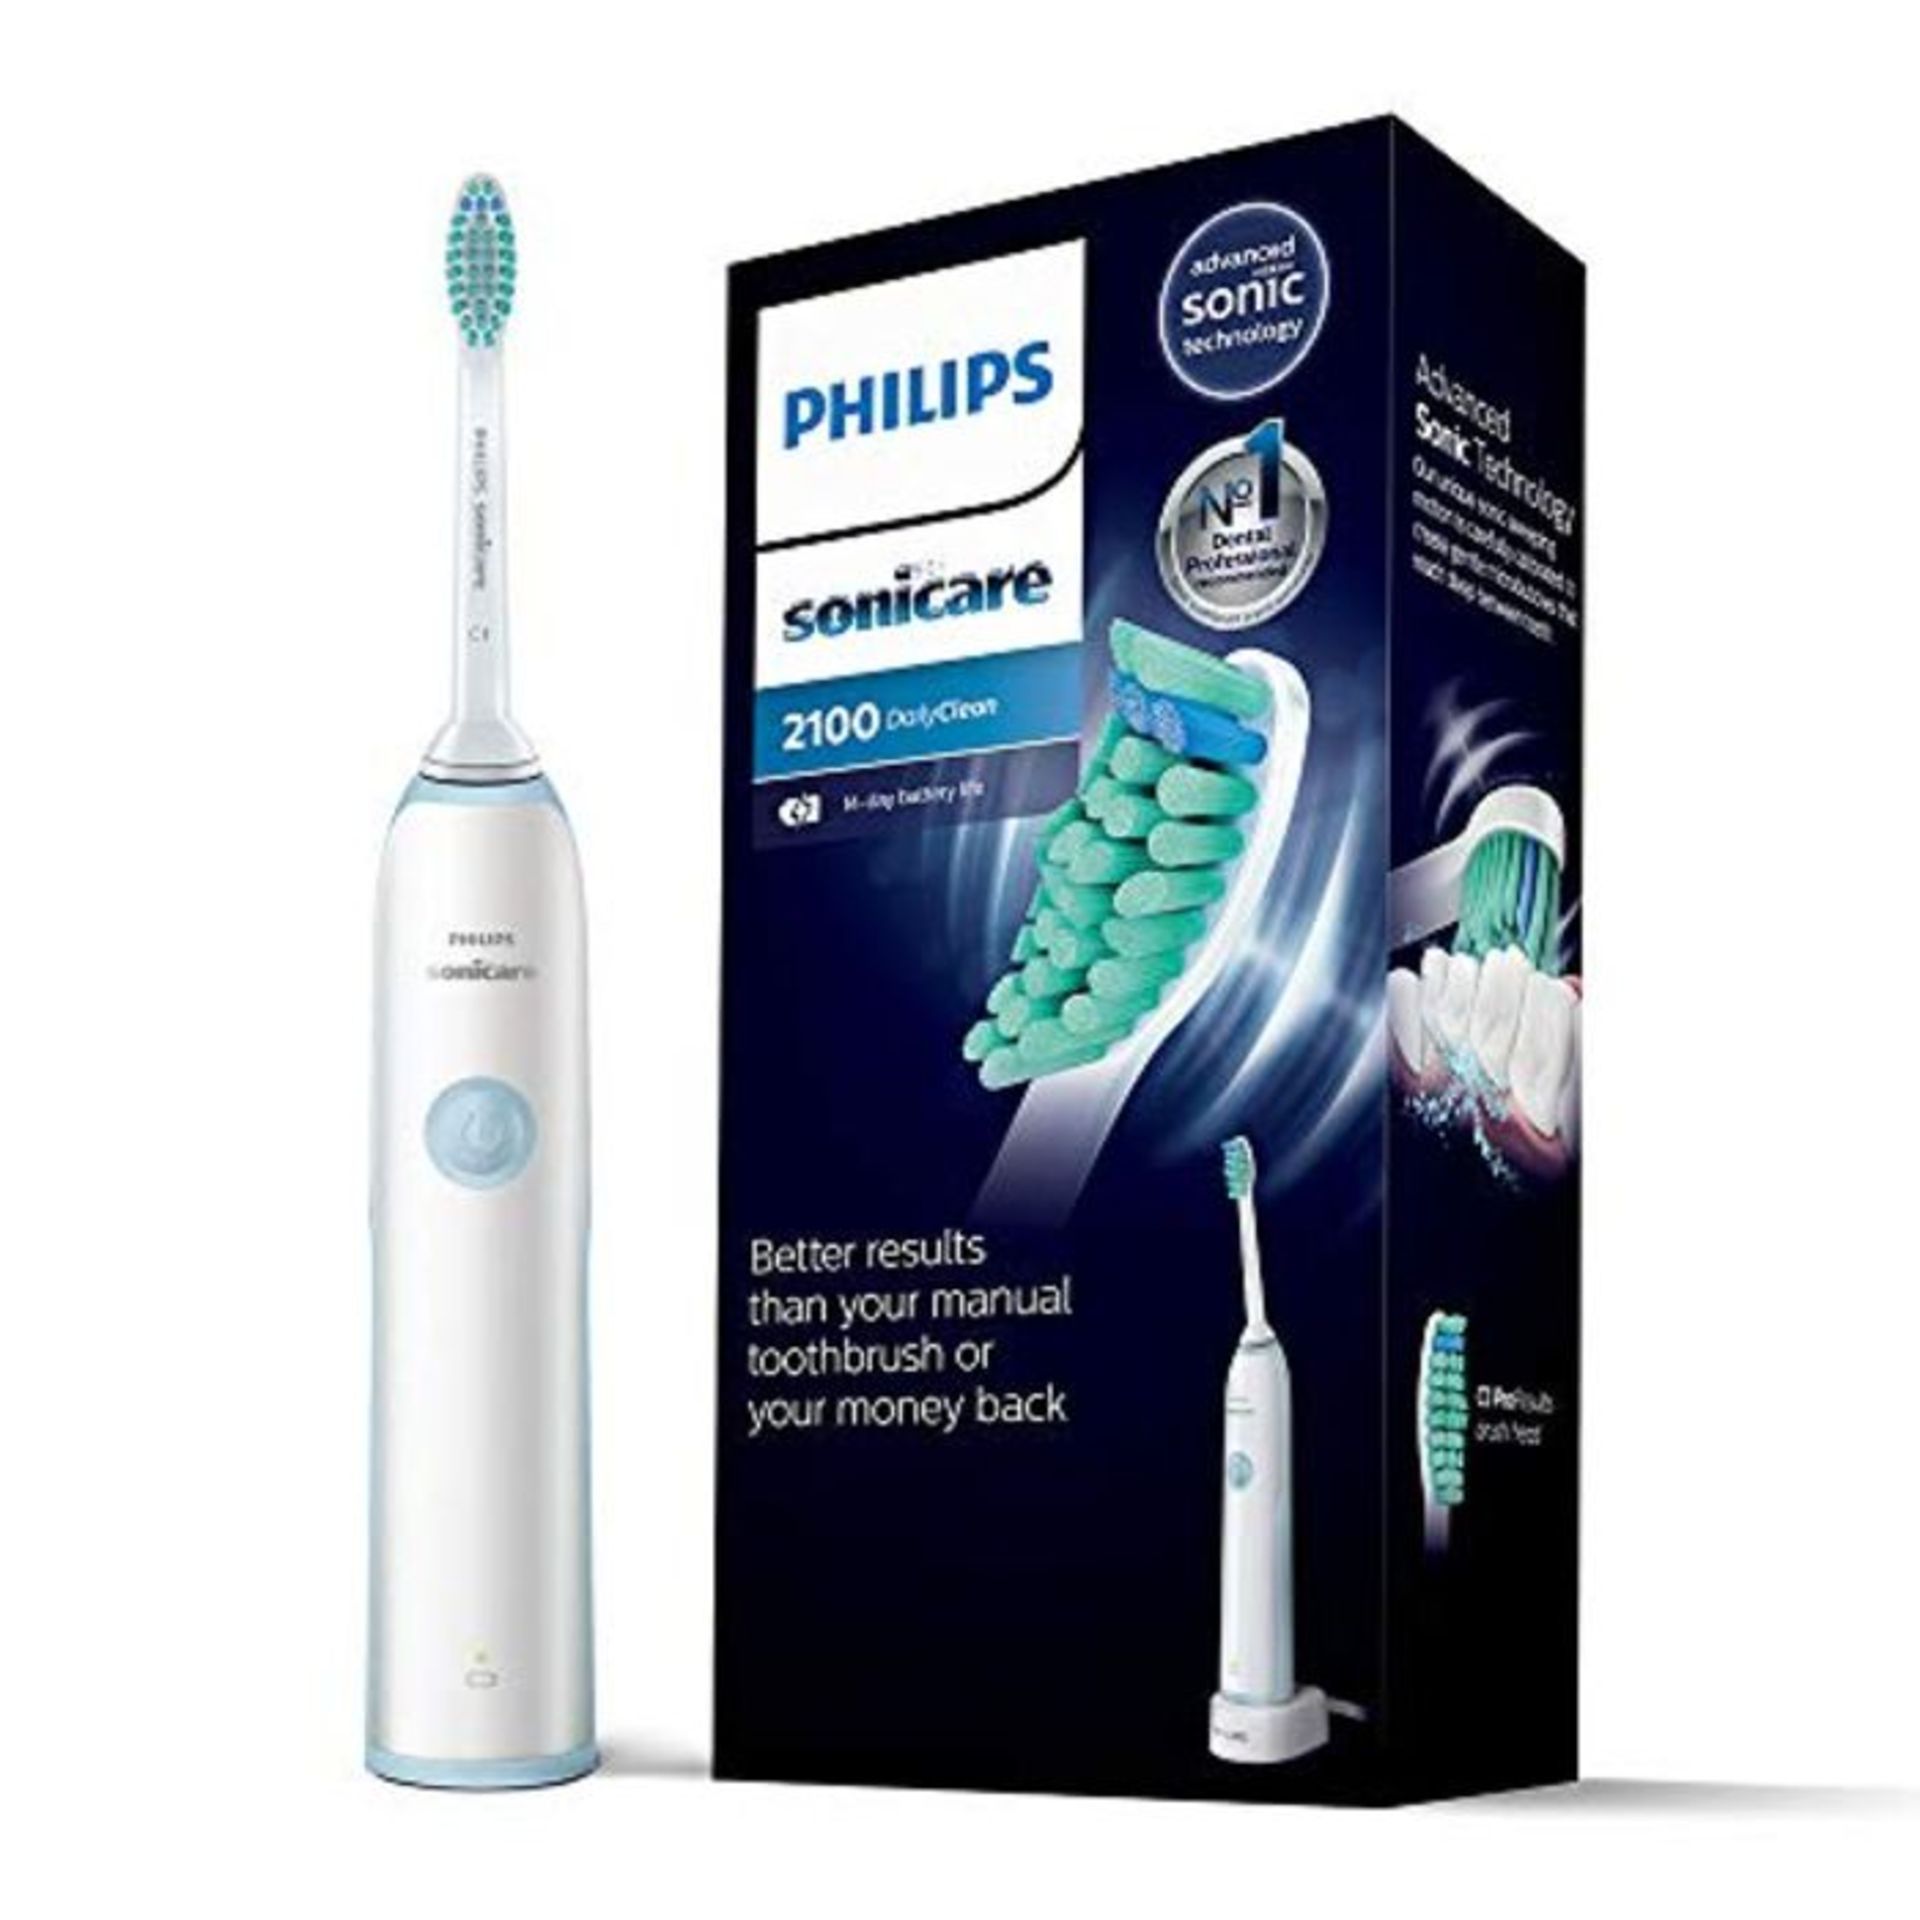 Philips Sonicare DailyClean 2100 Rechargeable Electric Toothbrush, Light Blue (UK 2-pi